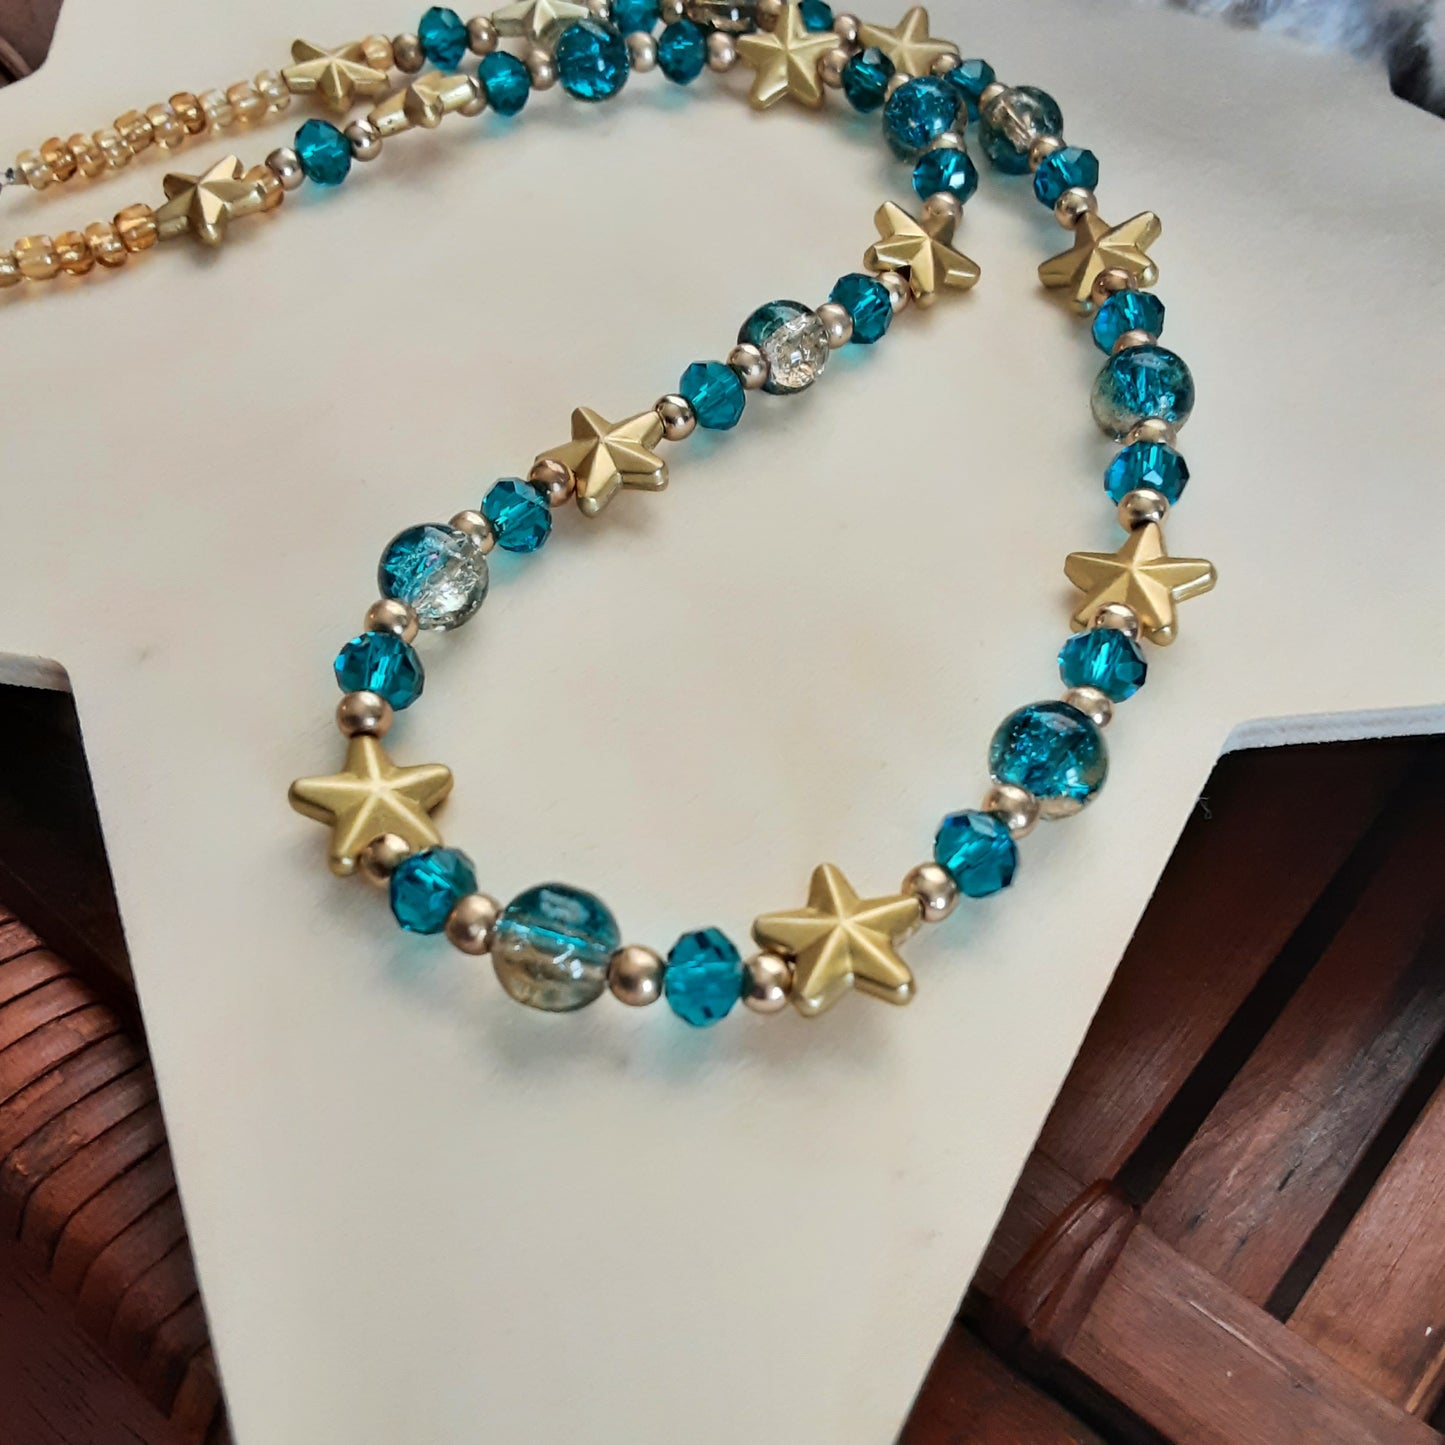 Gold and blue star necklace